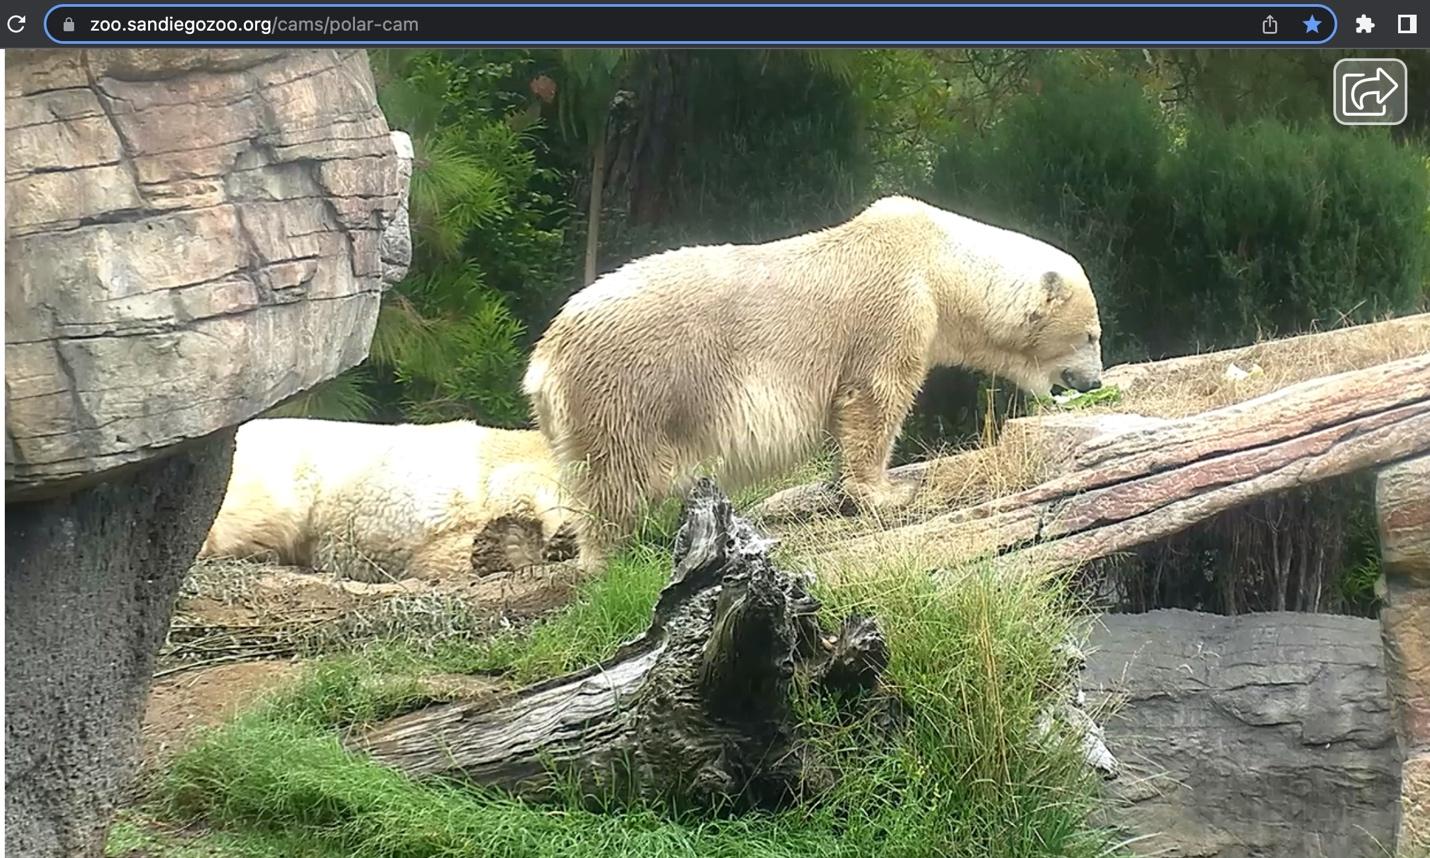 we can see the same structures as shown in our reference image, confirming that this is indeed the same zoo and polar bear enclosure: white oak security shared screenshot 